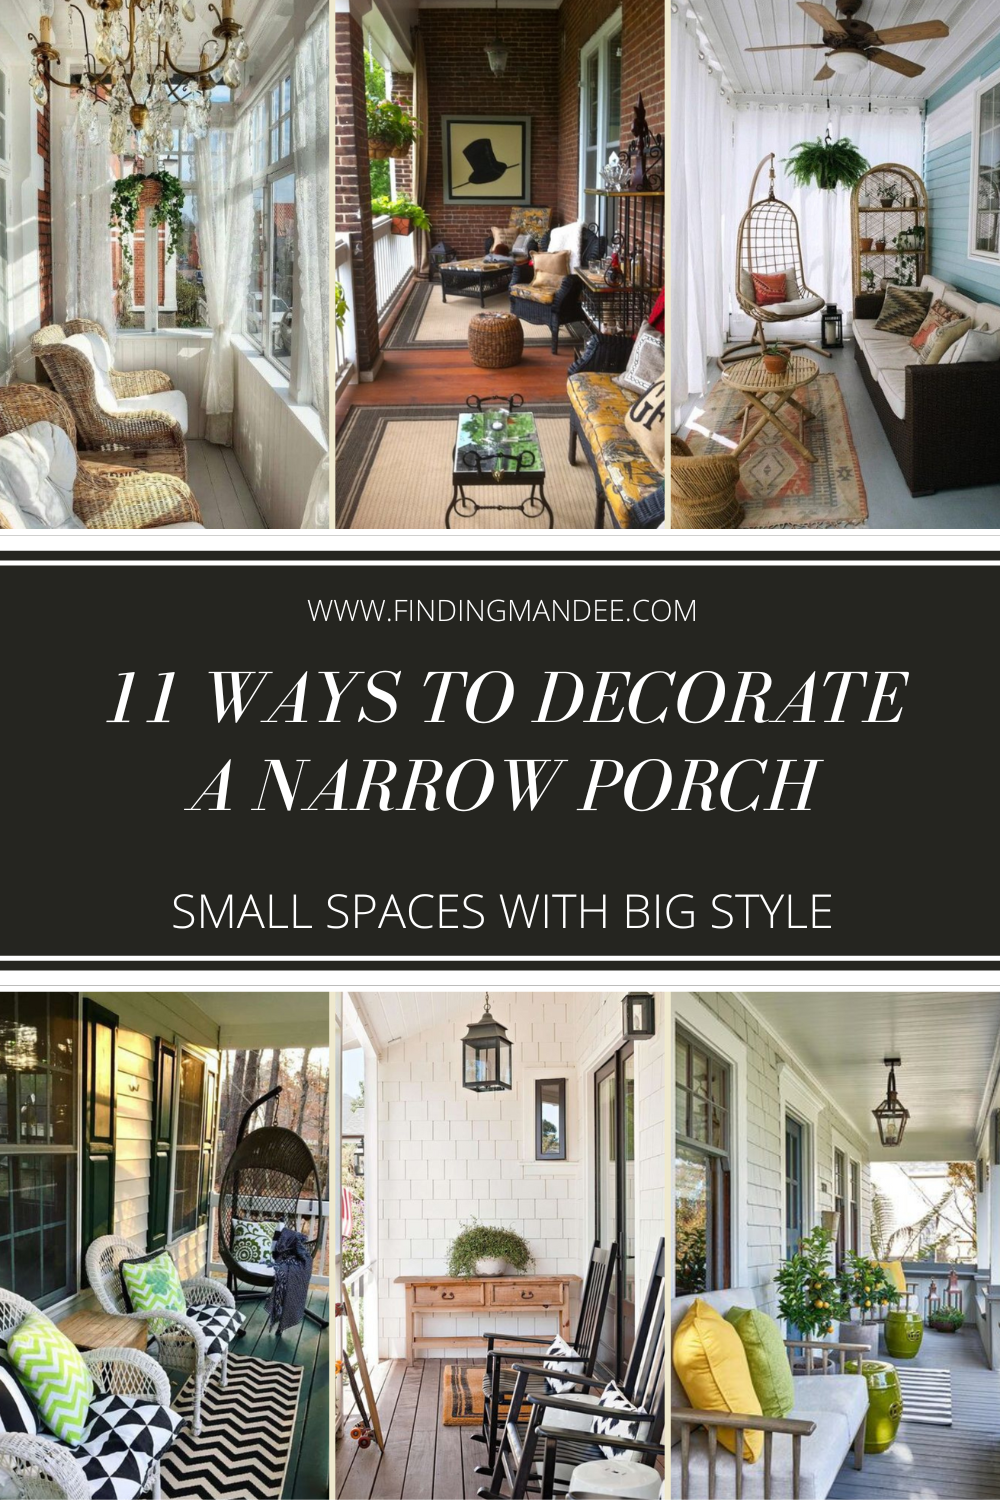 11 Ways to Decorate a Narrow Porch | Finding Mandee